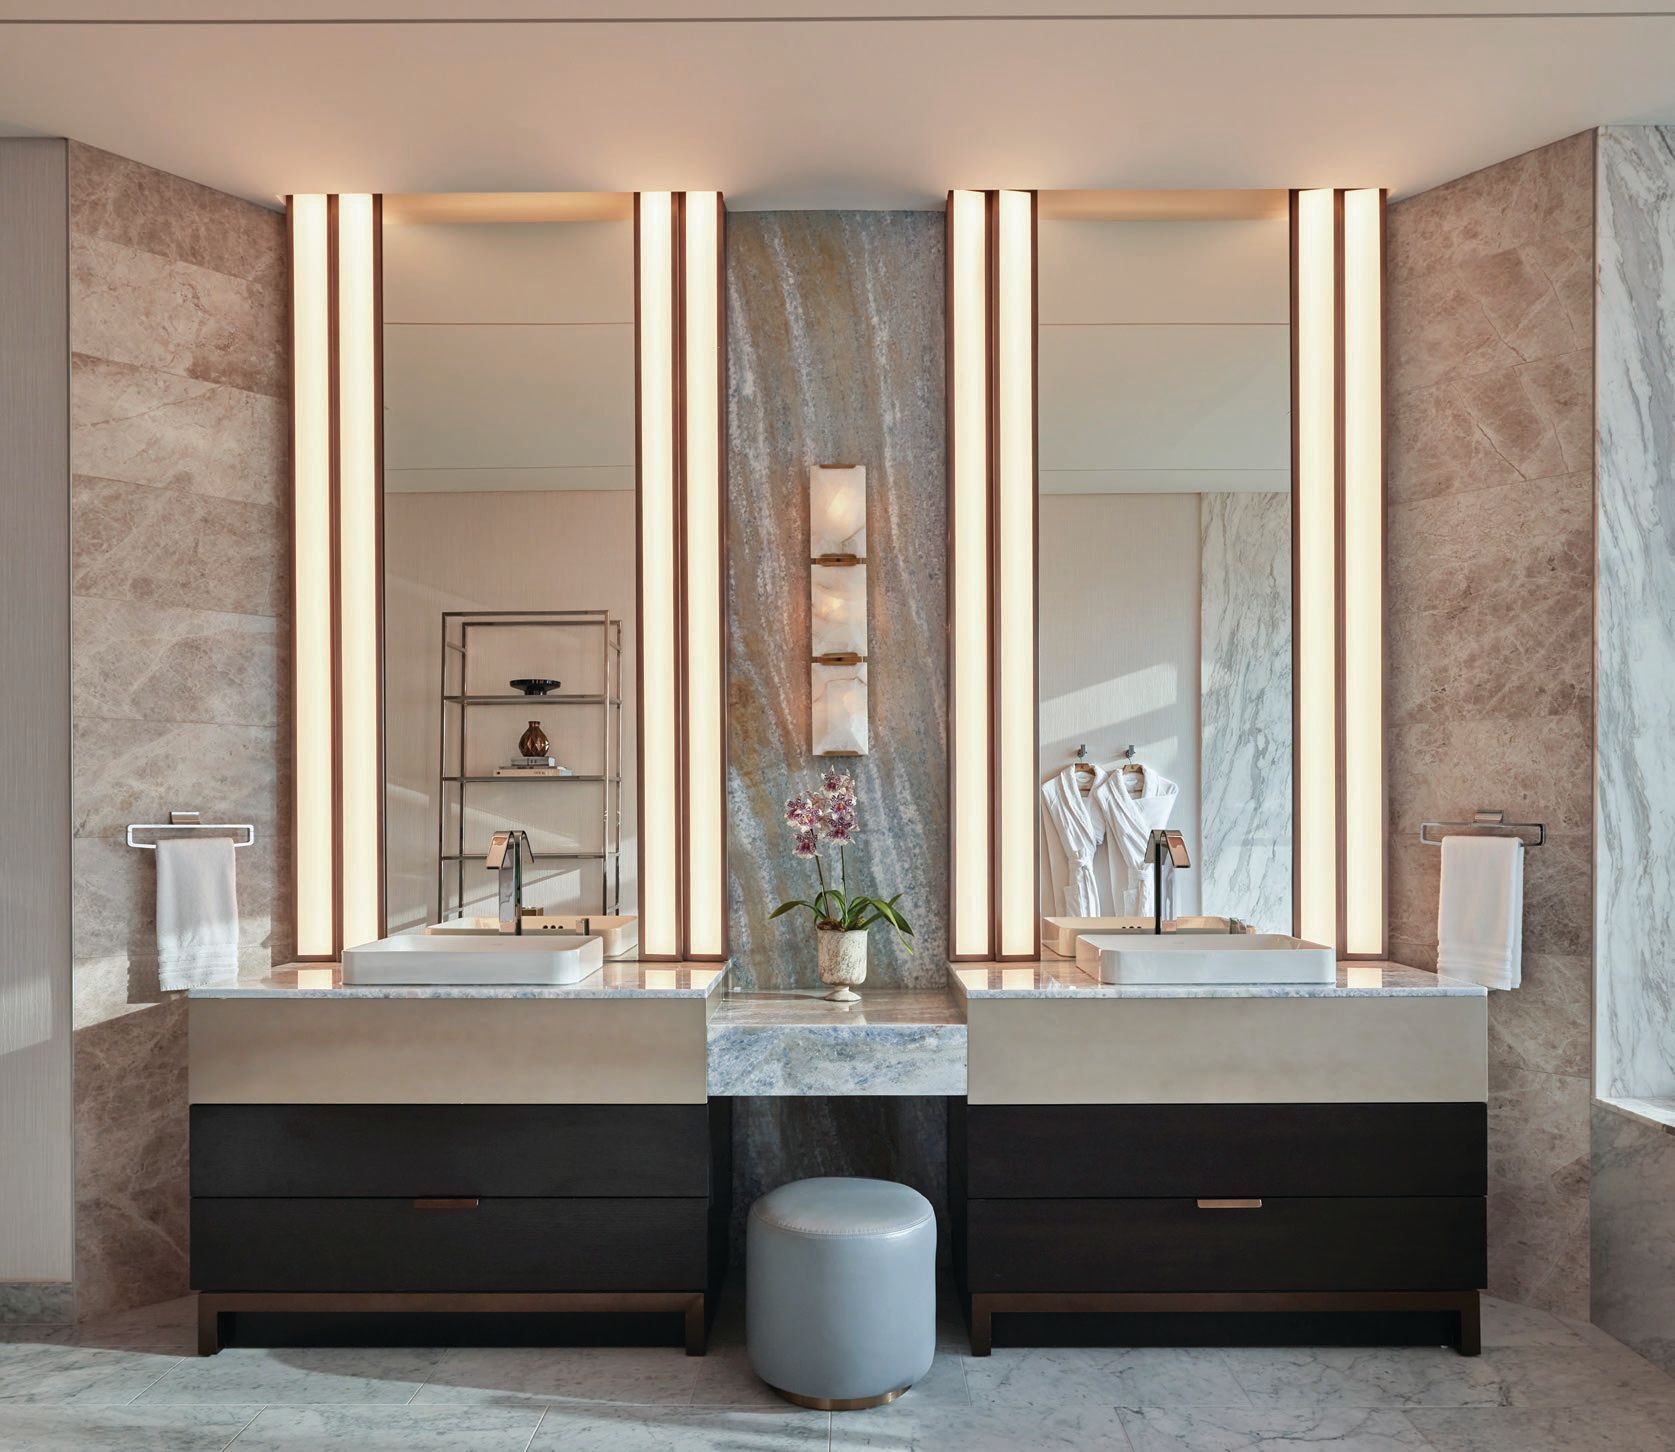 A custom vanity greets guests in the presidential suite’s luxe bathroom  Photographed by Mike Schwartz